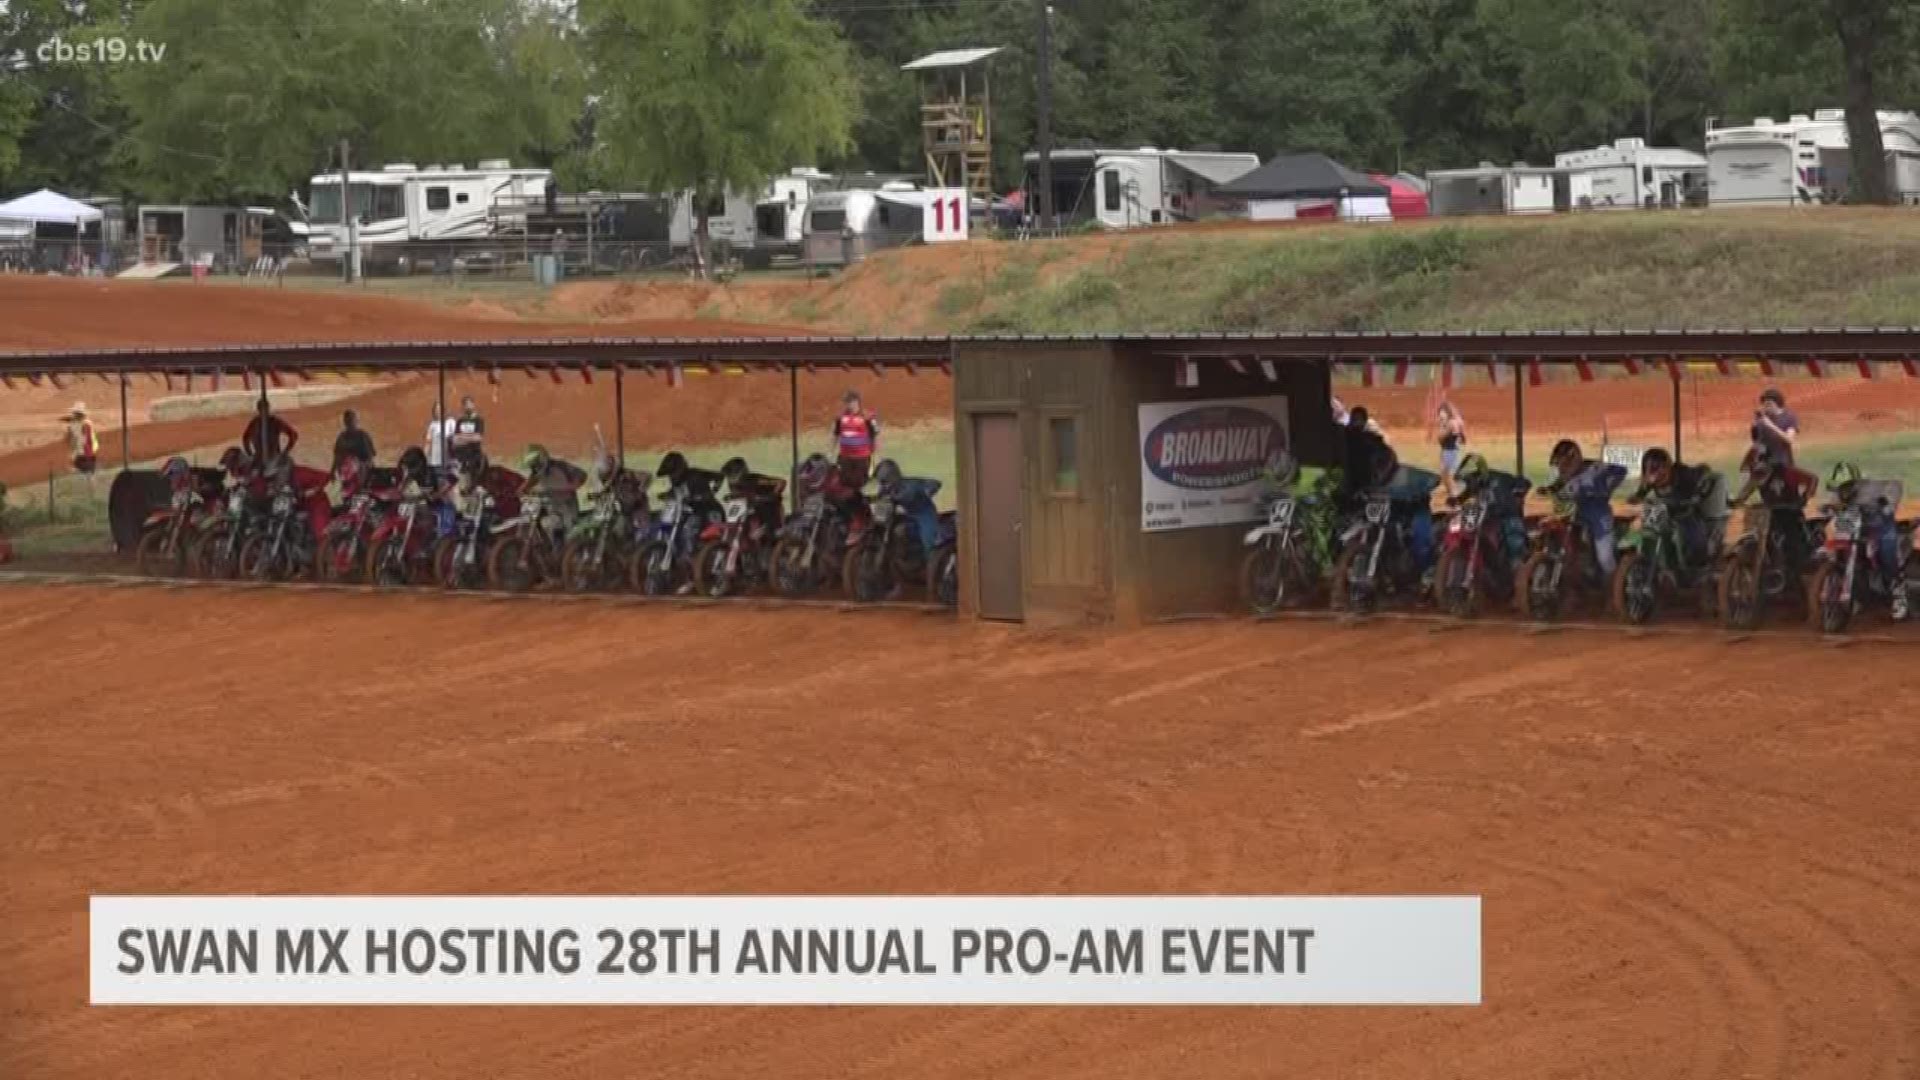 The oldest operating motocross track in Texas attracts riders from across the region for an event that includes $25,000 in prize money.